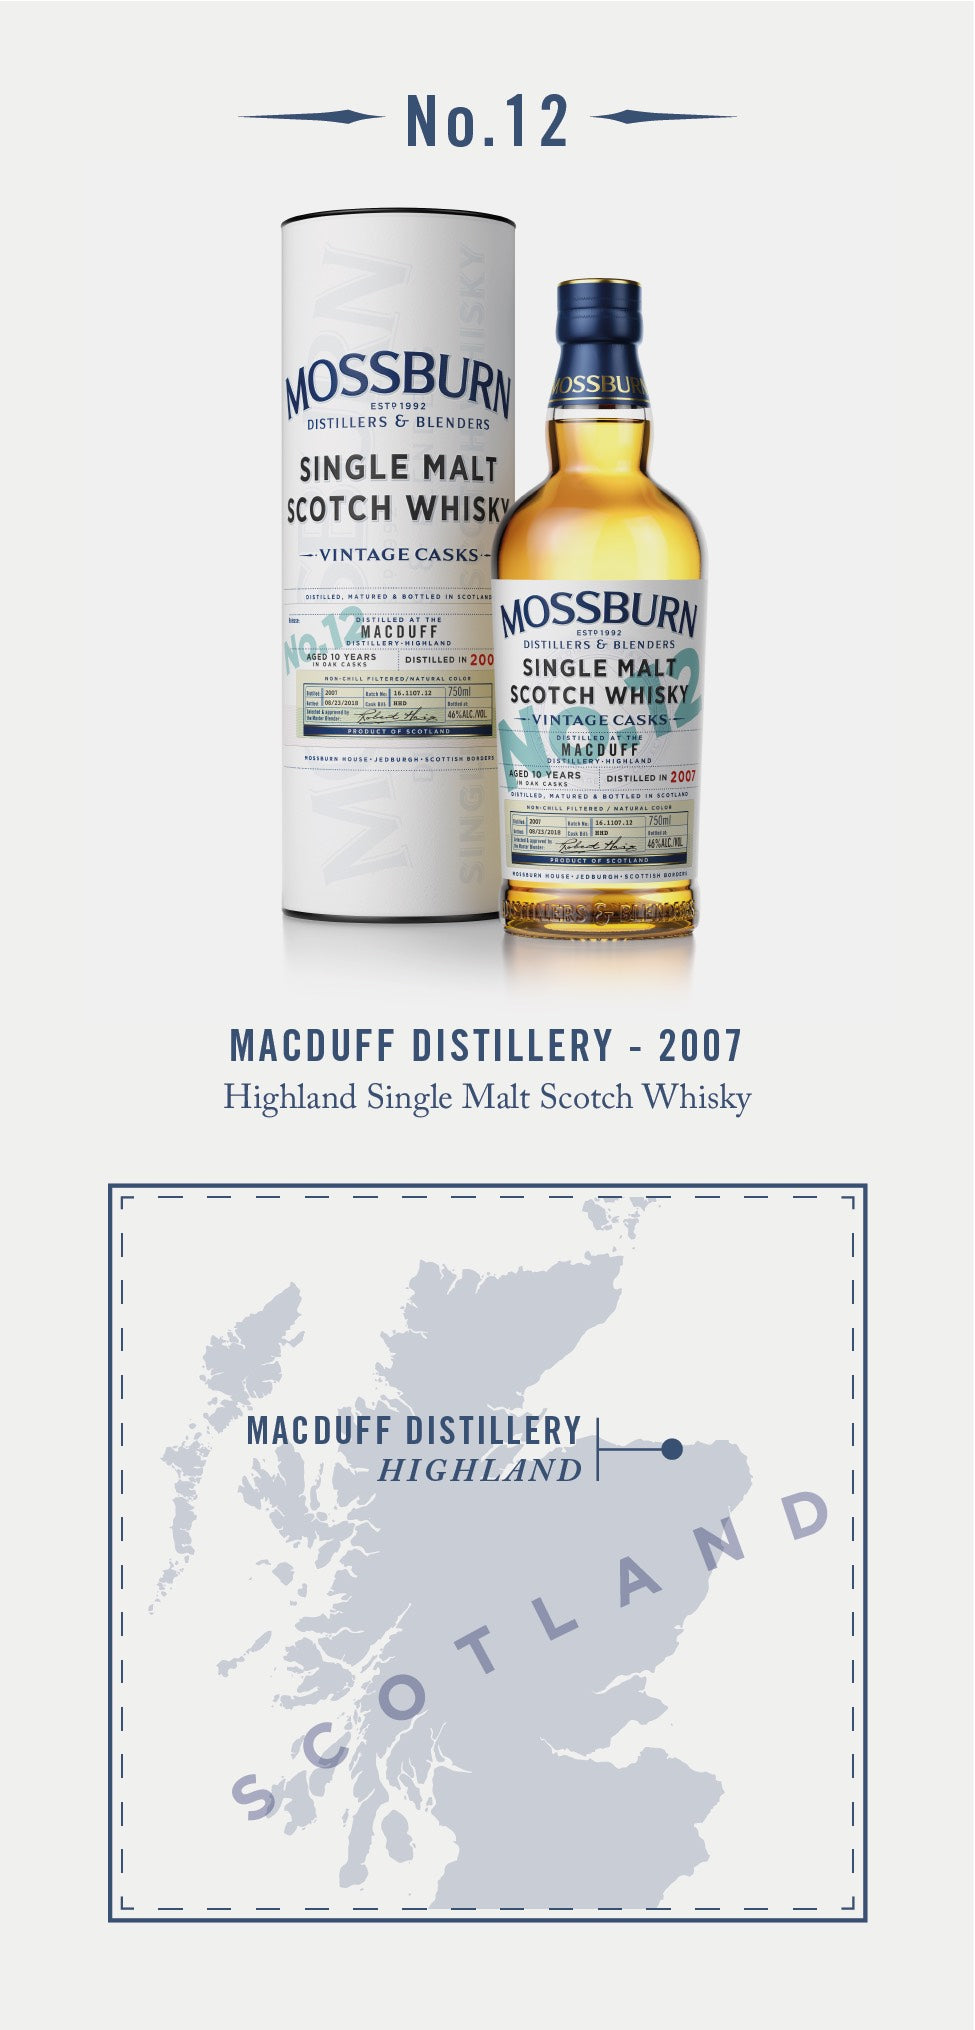 Macduff 10 Years Old No. 12 Scotch Whisky by Mossburn Distillers